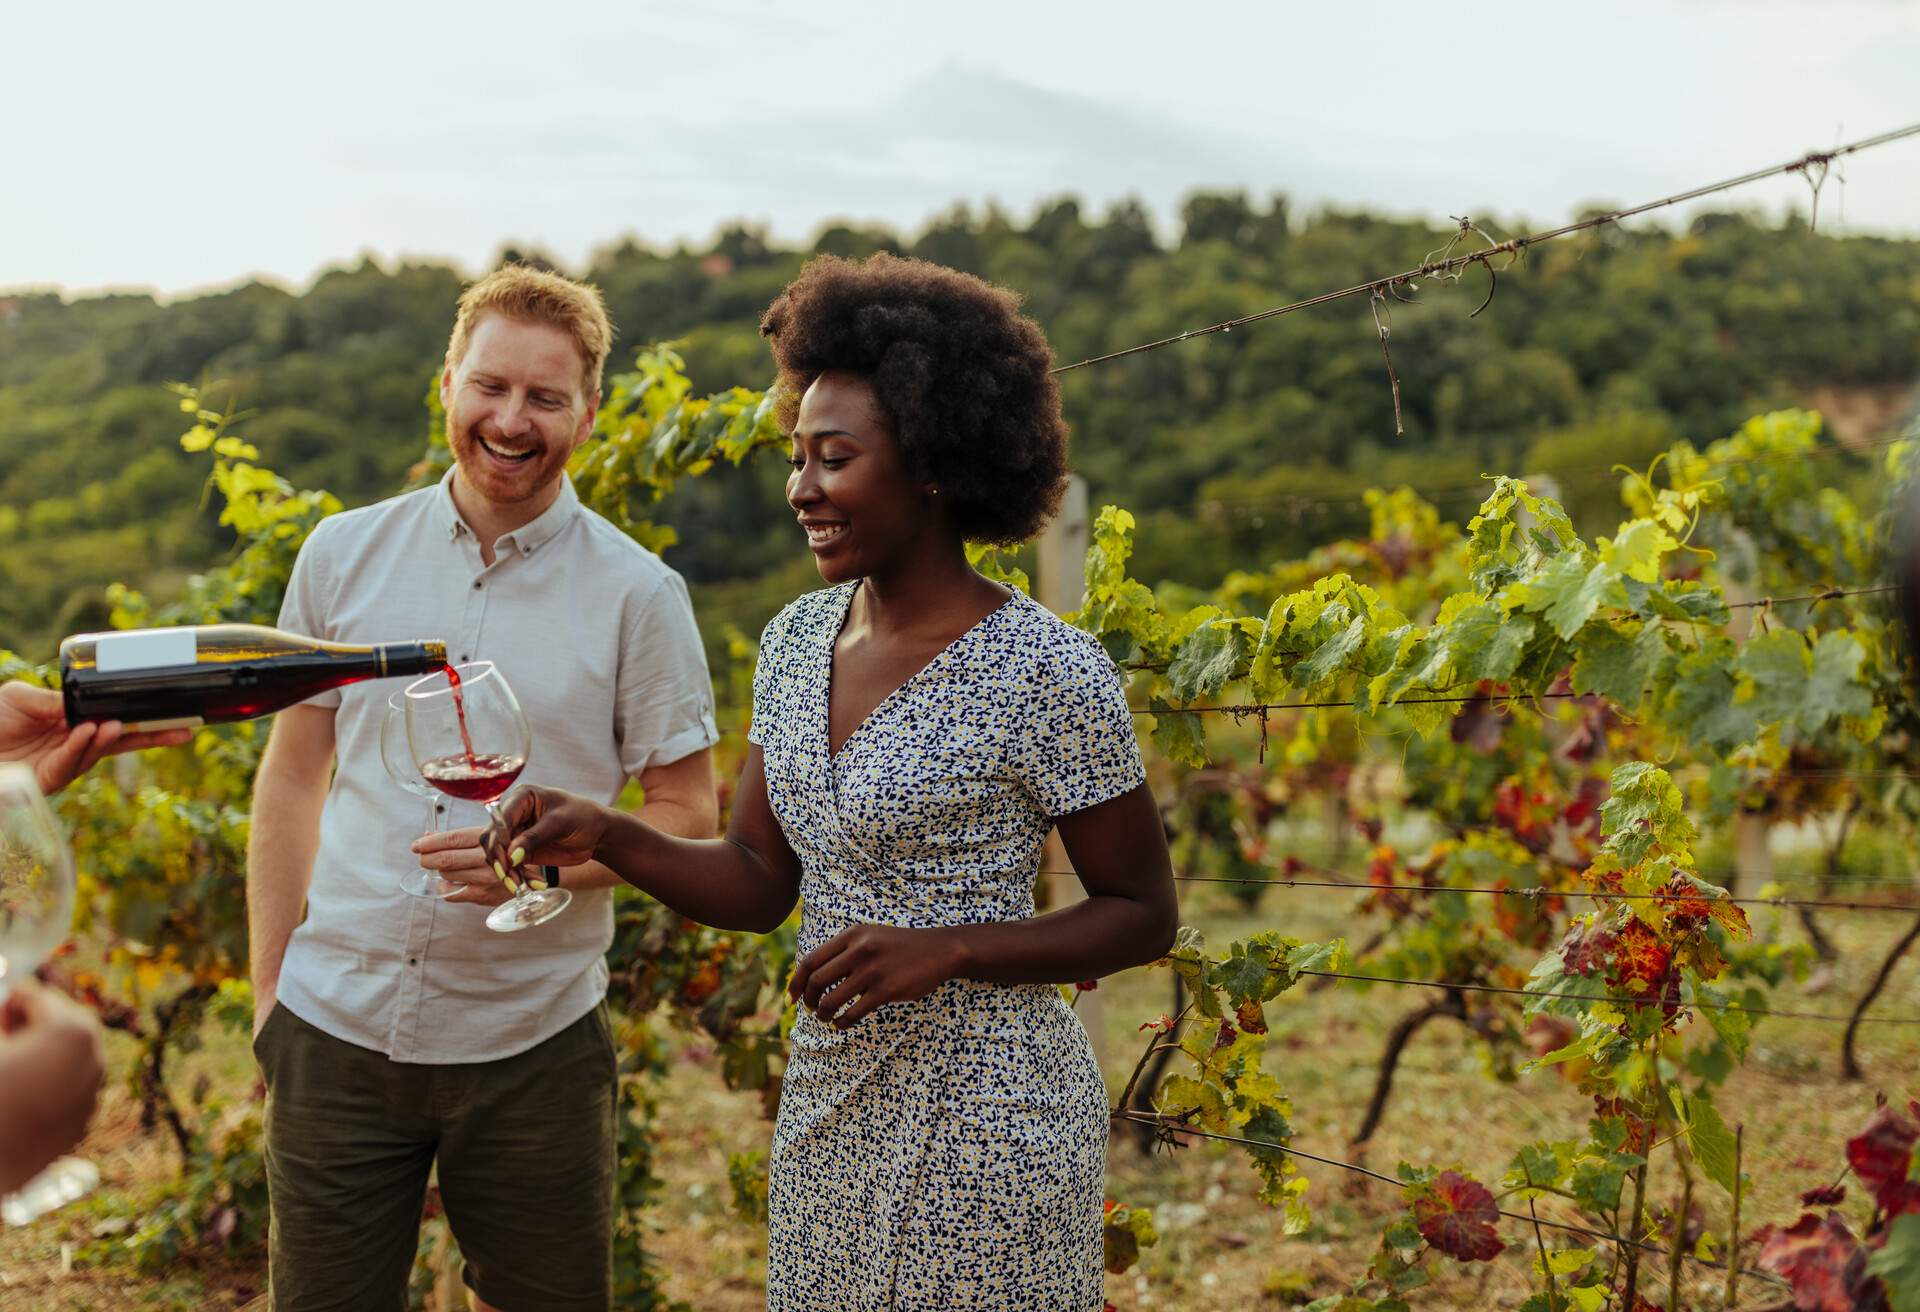 Young people enjoying wine in vineyard. Unrecognizable man pouring glass with red wine to black woman